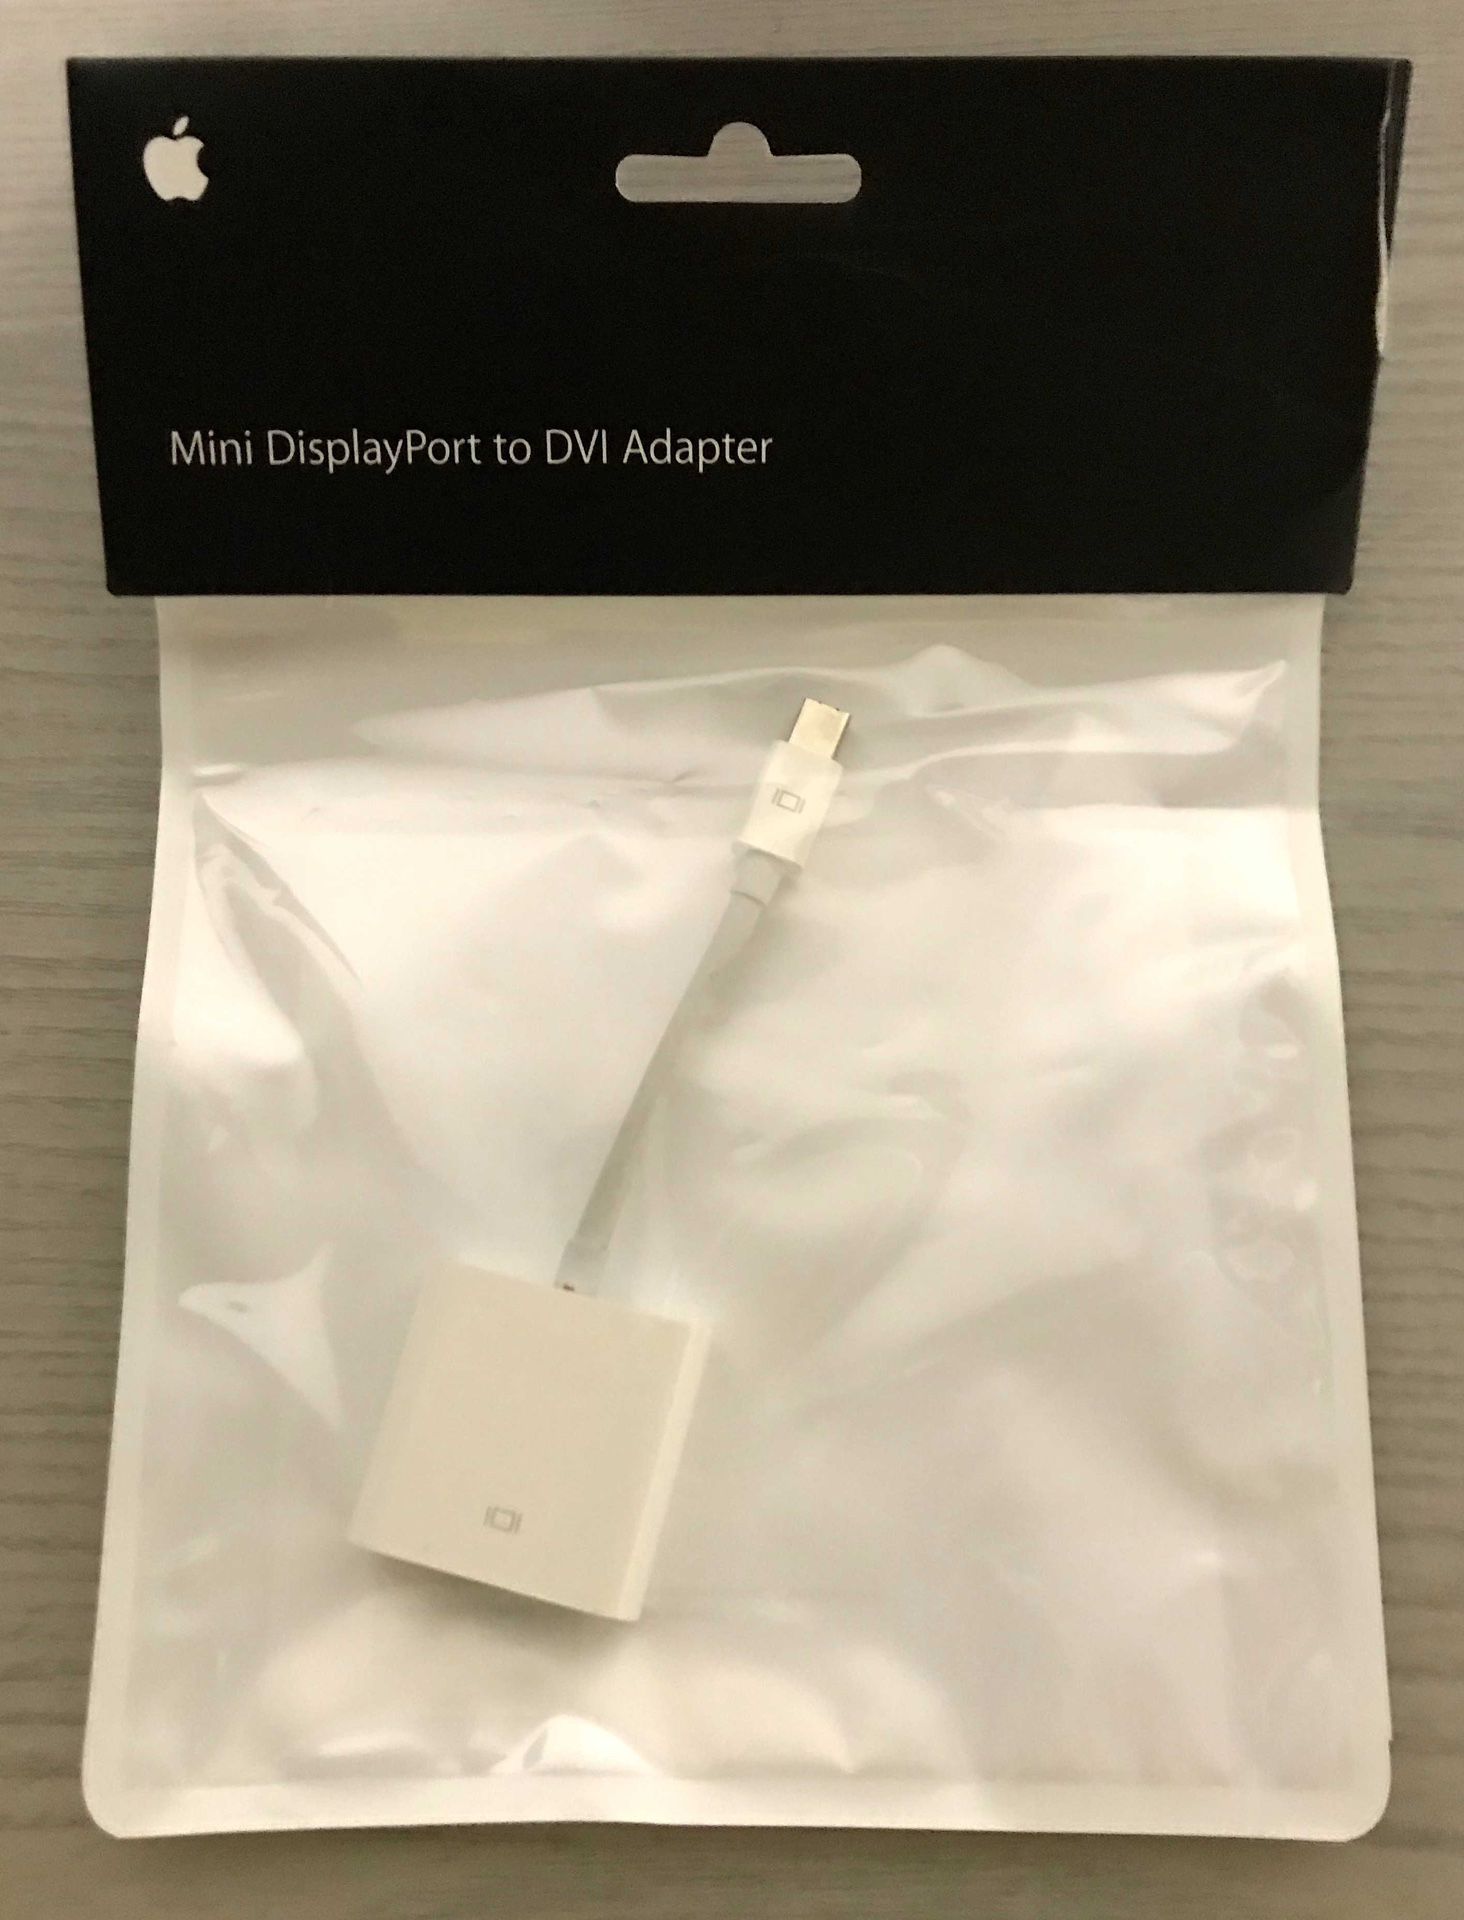 Apple/PC Accessories, Cables, Adapters and Connectors